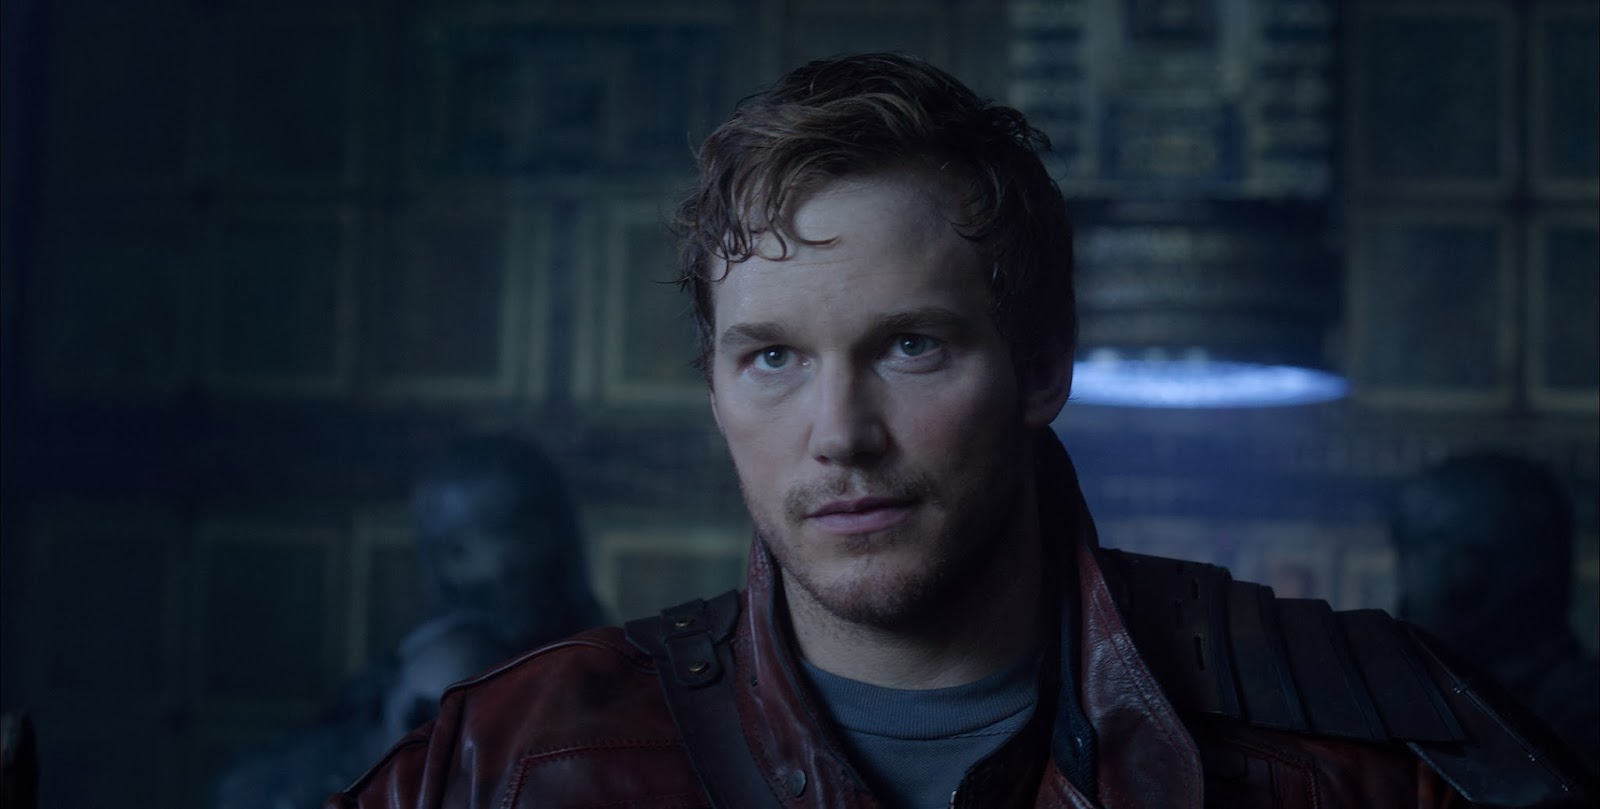 Handsome Starlord is handsome!